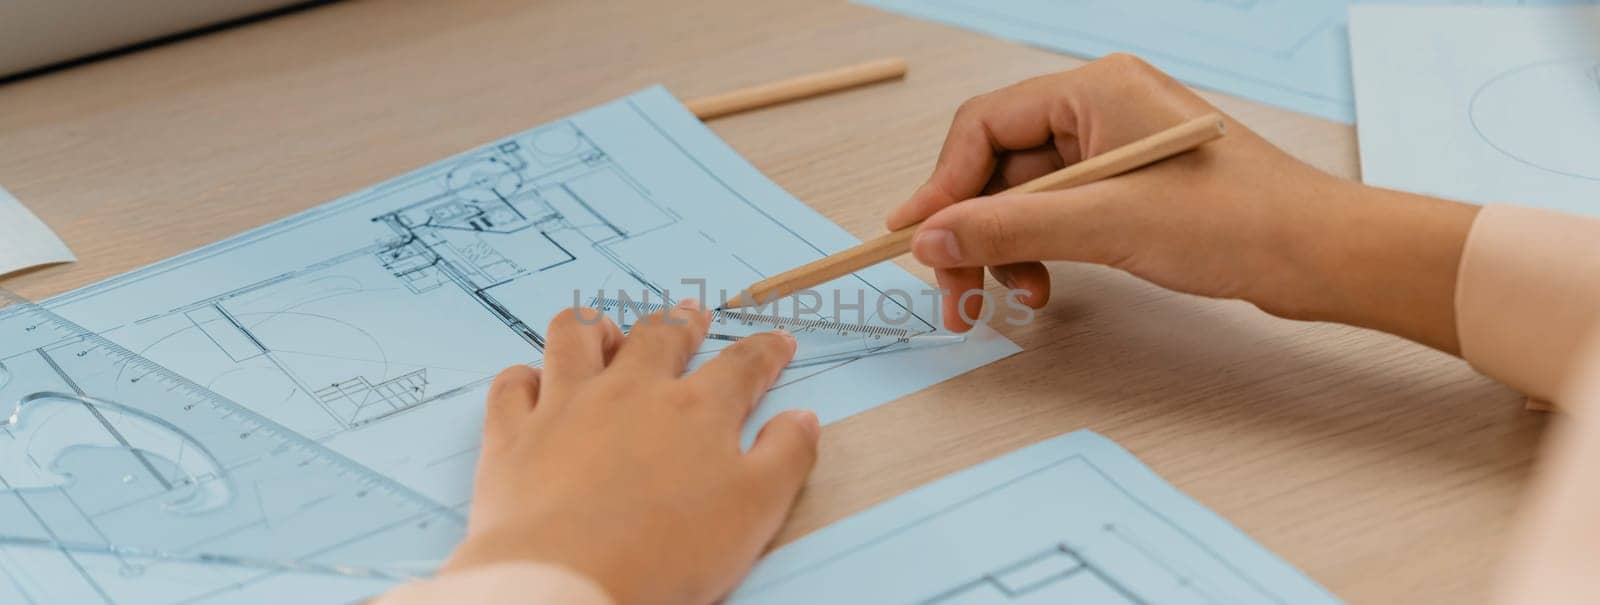 Professional architect hand drawing a blueprint on table. Closeup. Delineation. by biancoblue